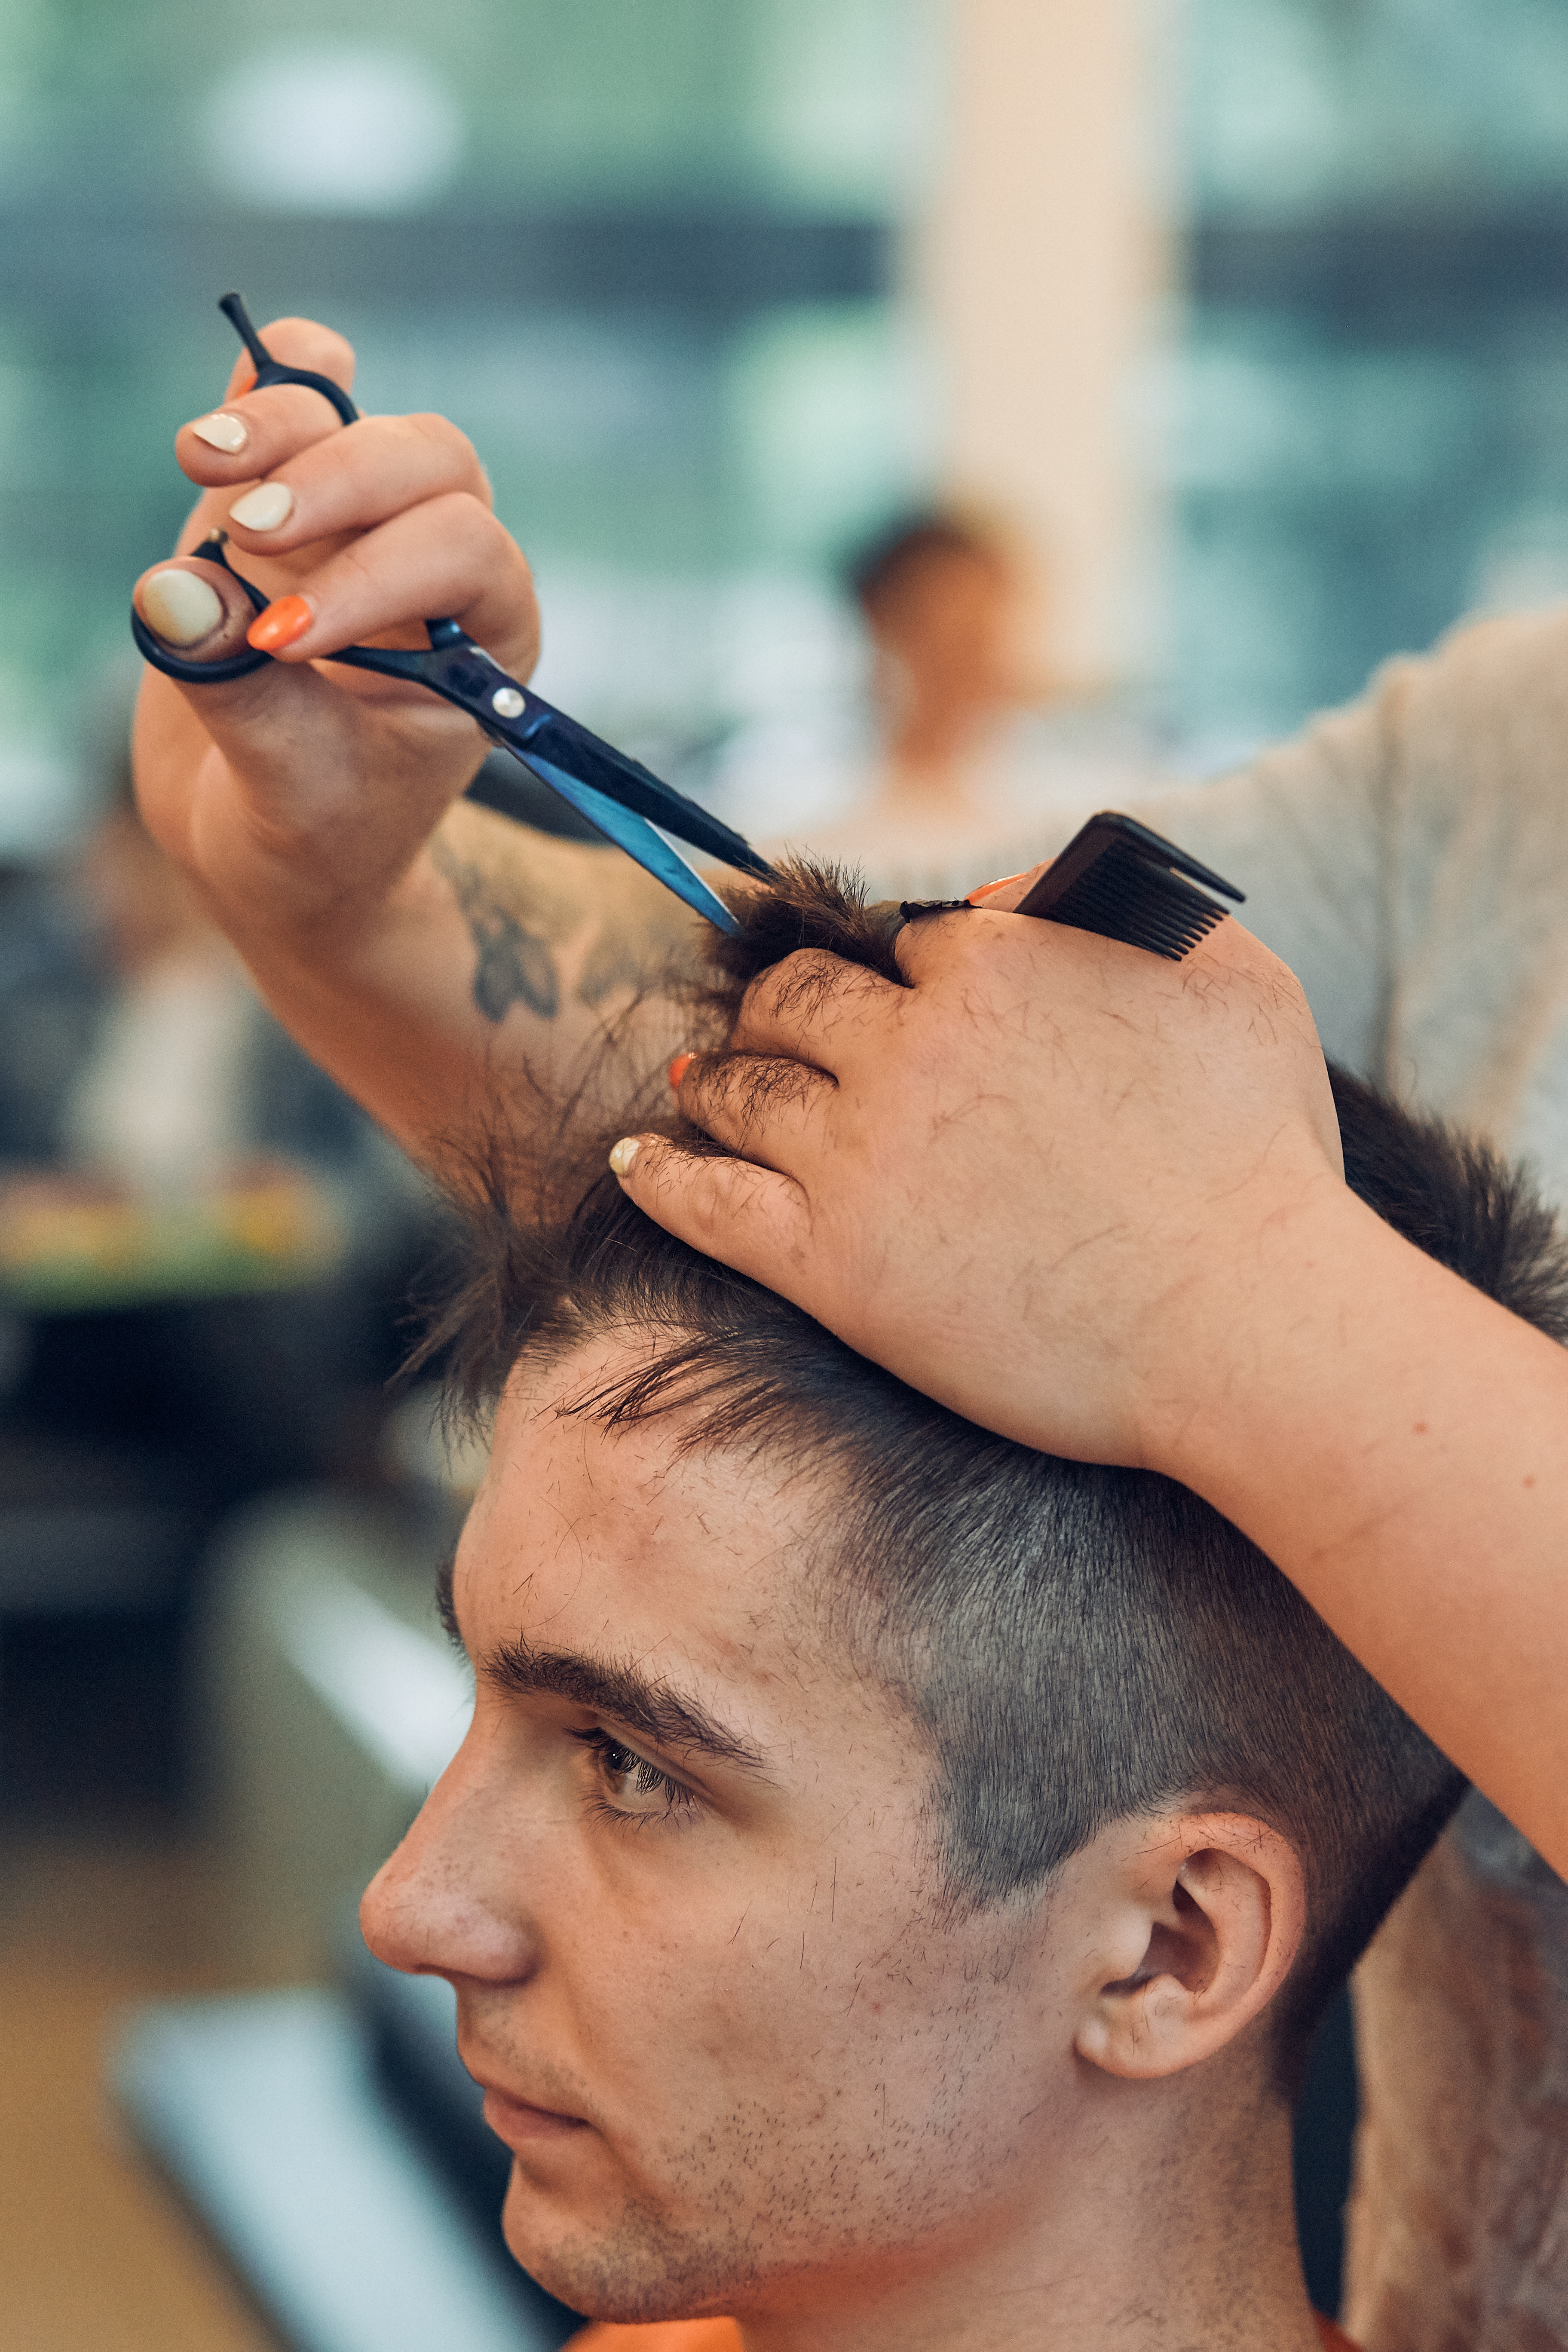 Overview of barbering skills